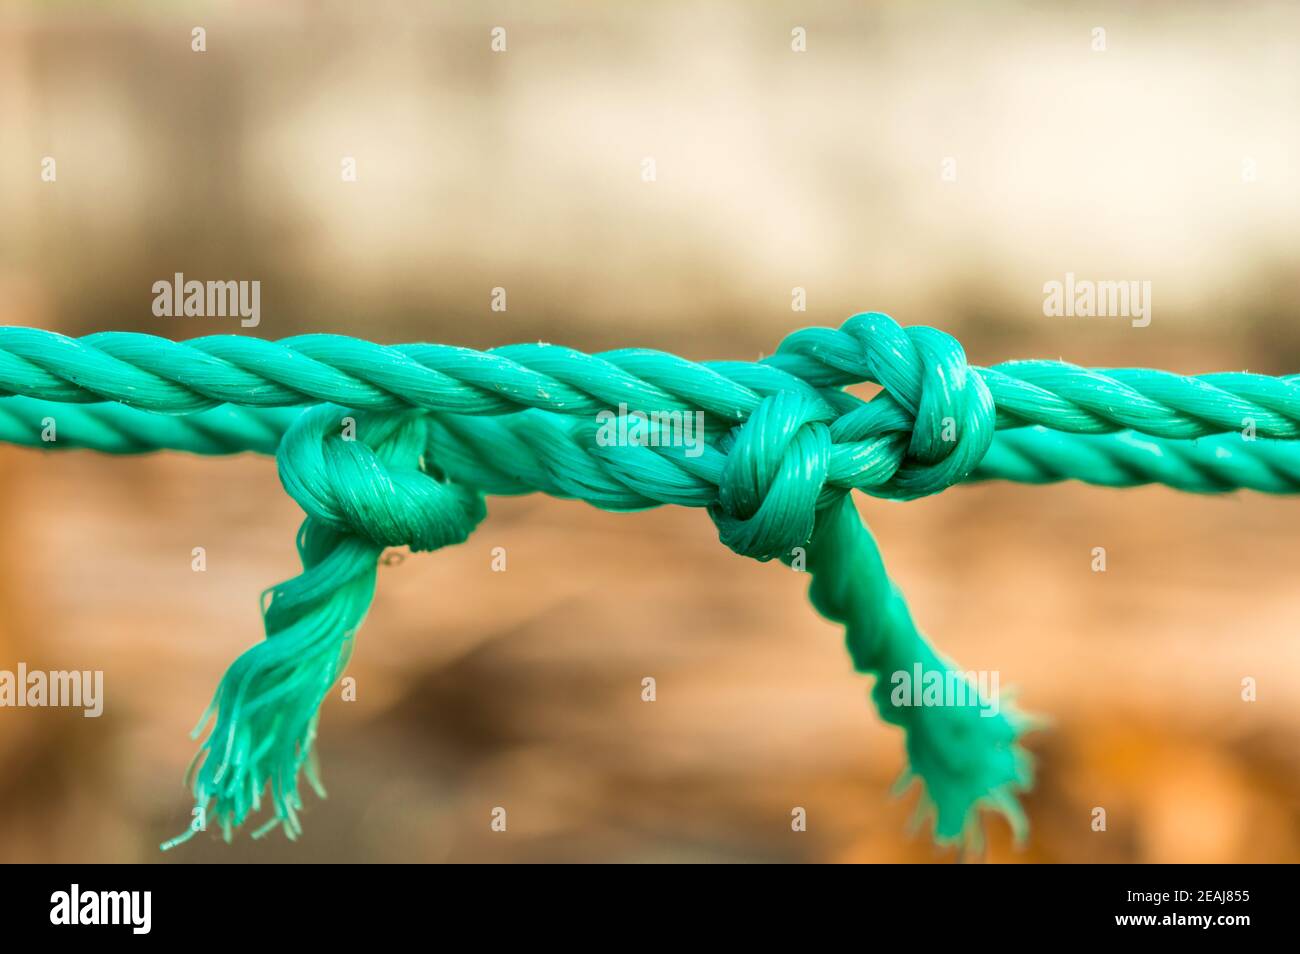 Rope tie knot Closeup. Rope with a two tied knot in the middle isolated  from background.